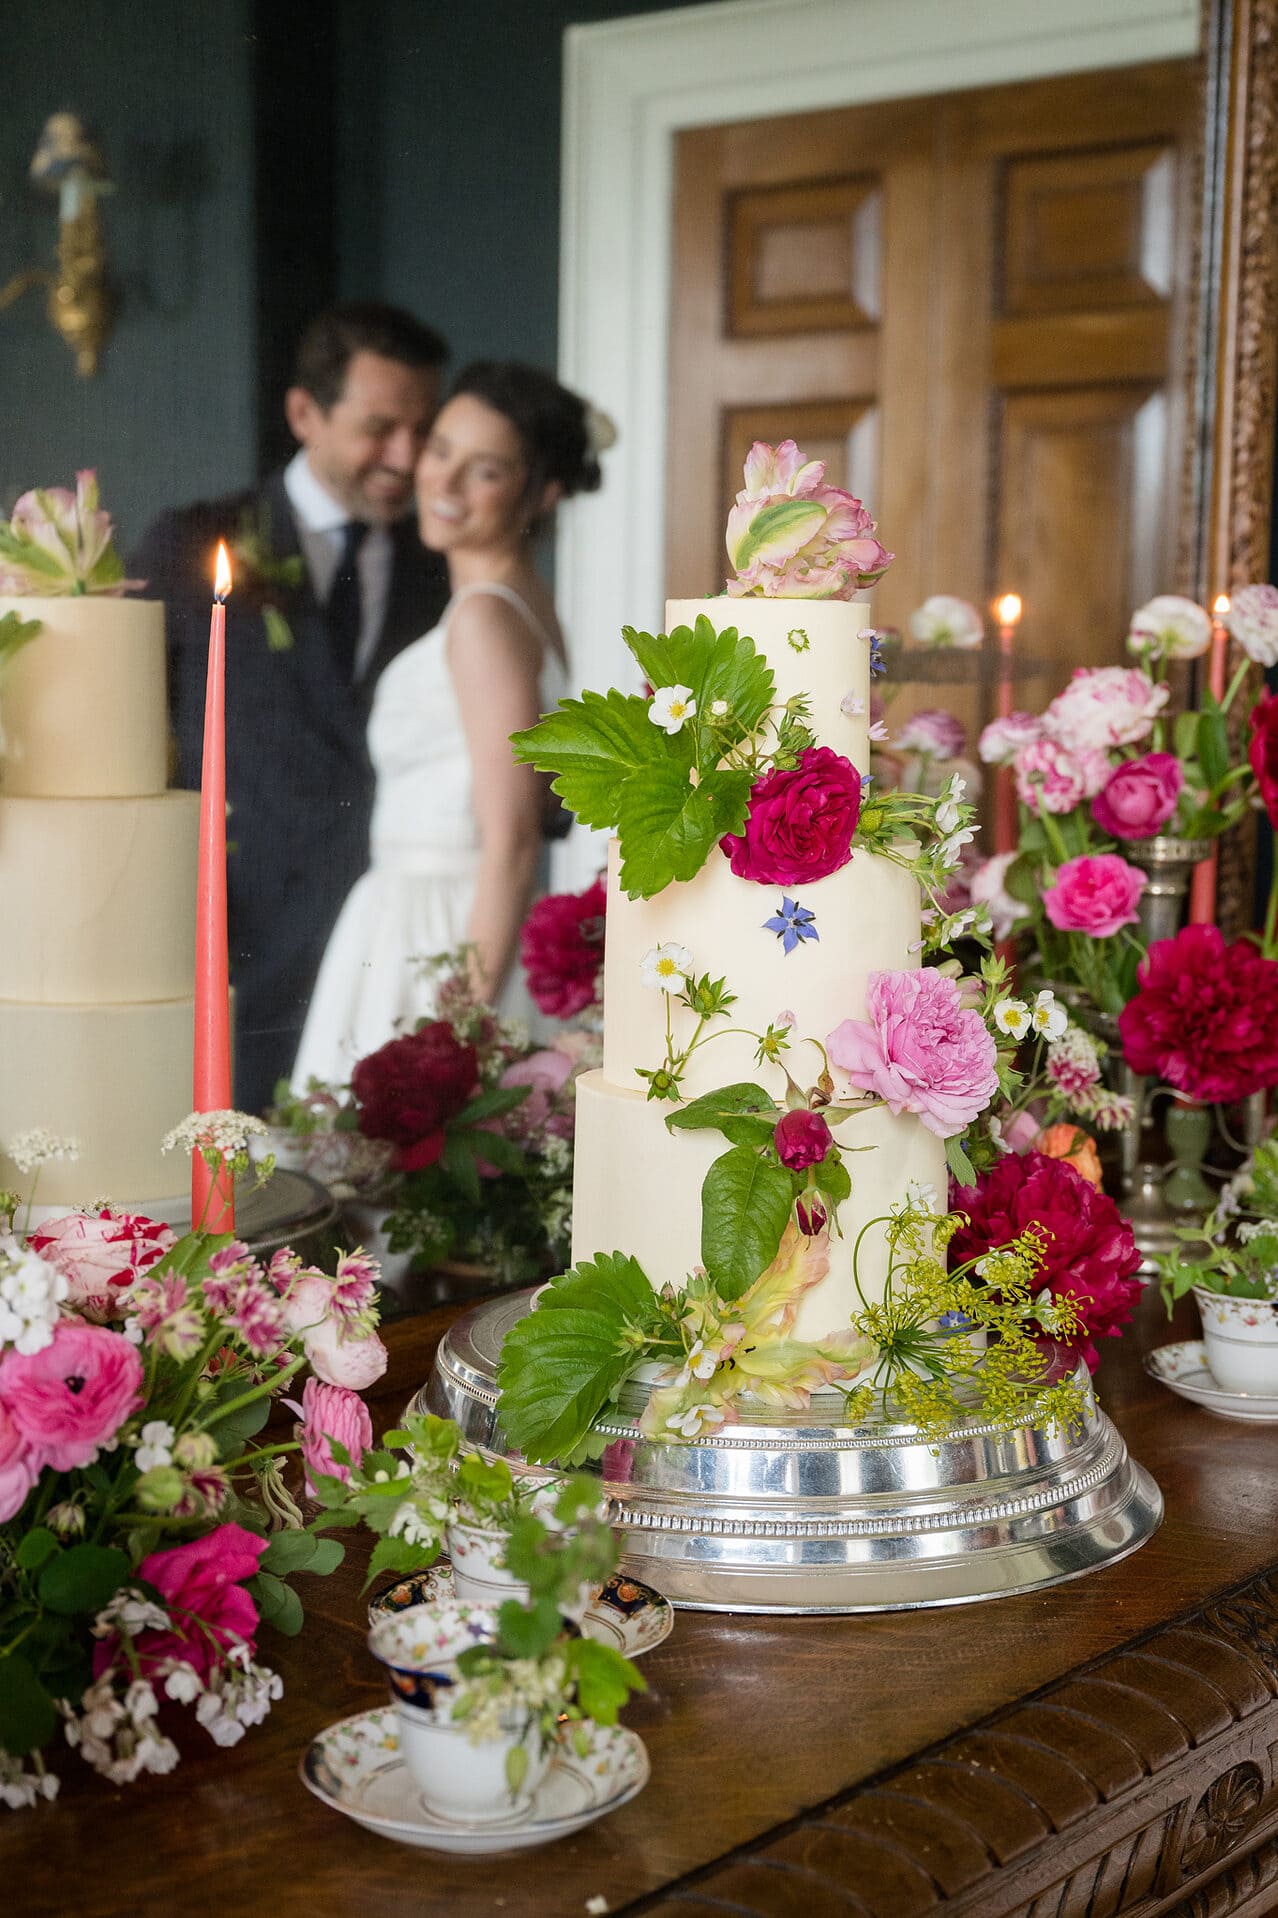 A buttercream wedding cake decorated with fresh flowers in front of a mirror which is reflecting the bride and groom